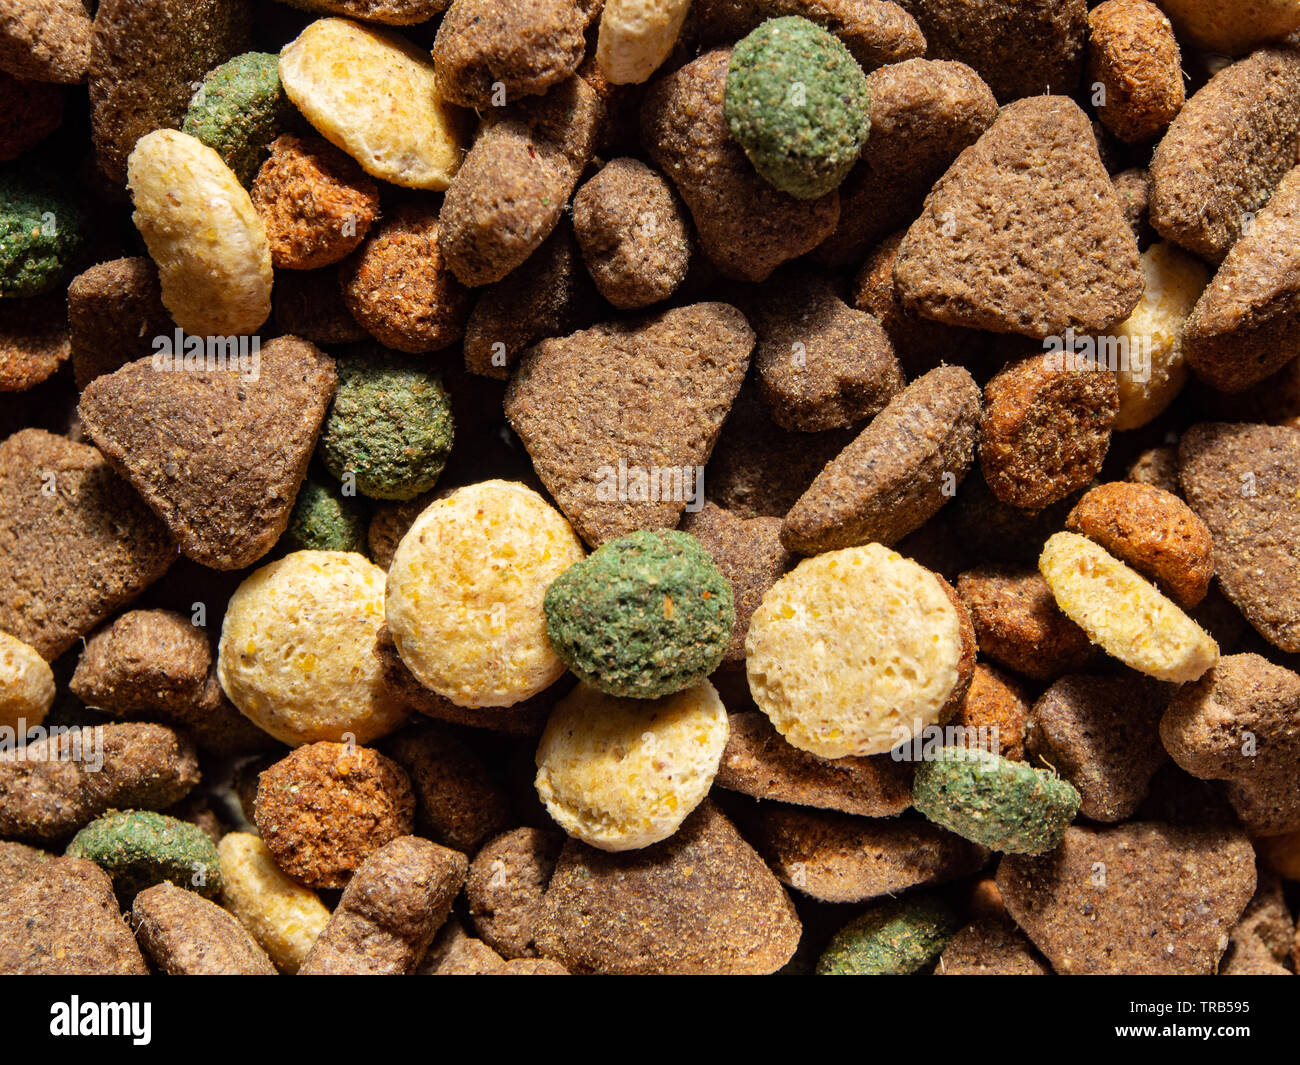 A close up of dry dog food, kibble Stock Photo